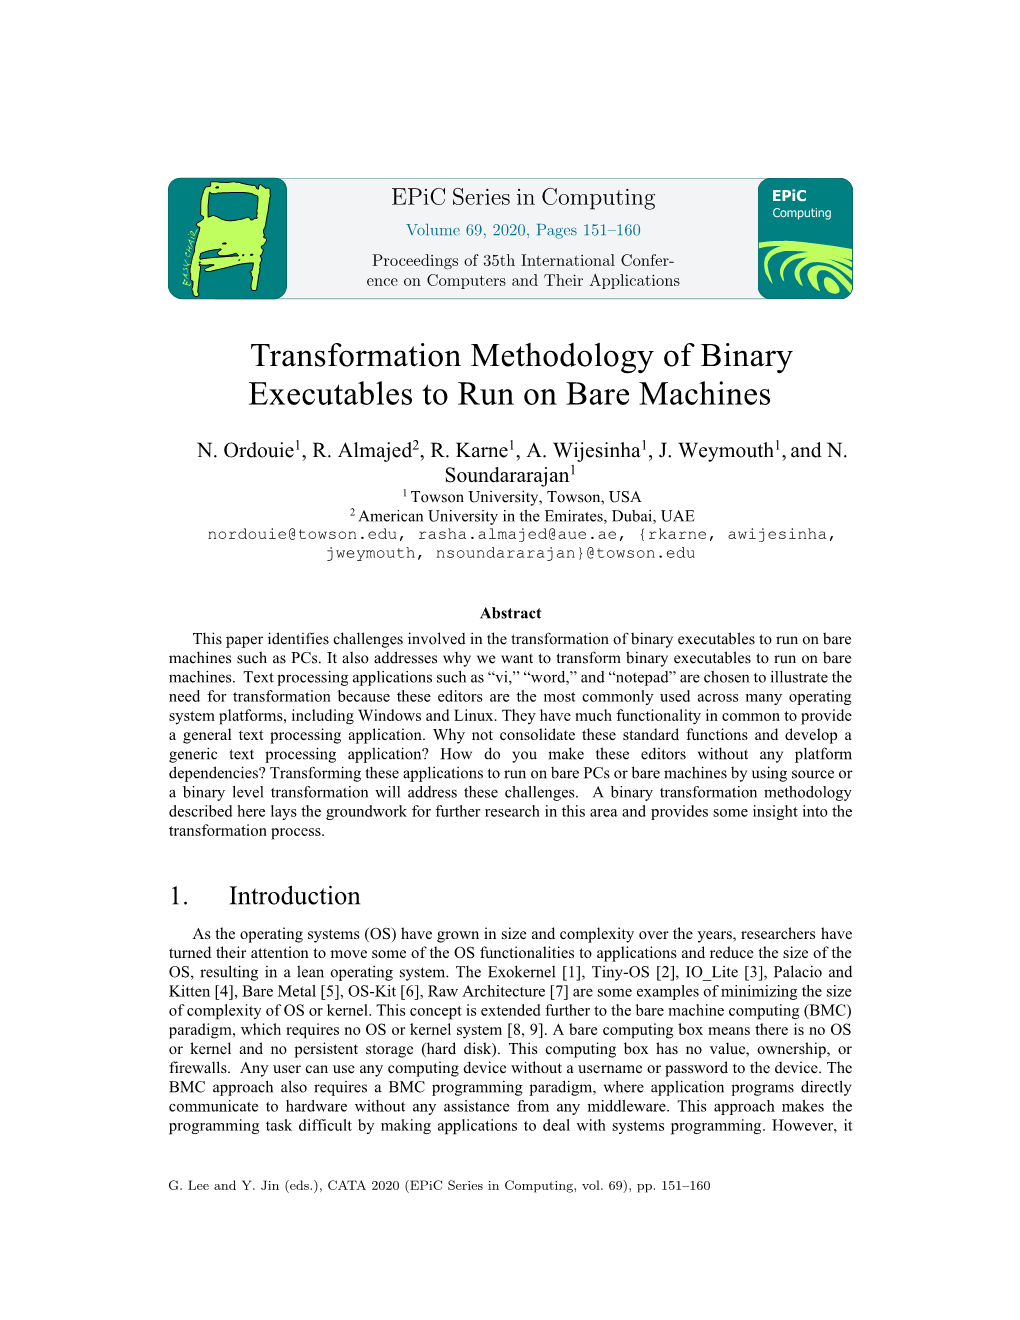 Transformation Methodology of Binary Executables to Run on Bare Machines